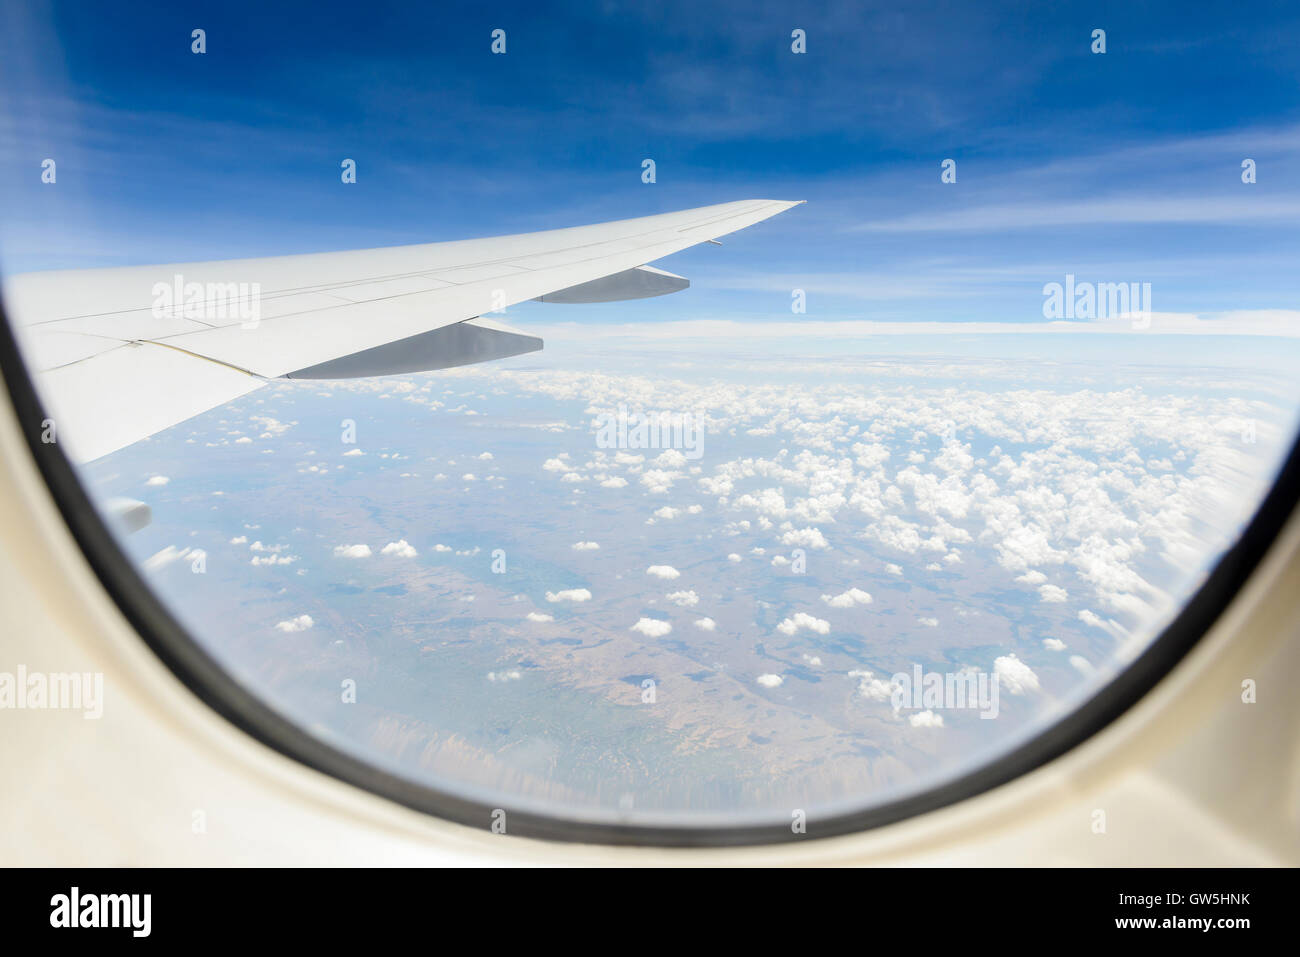 Land clouds and sky seen through window of aircraft cabin. Stock Photo